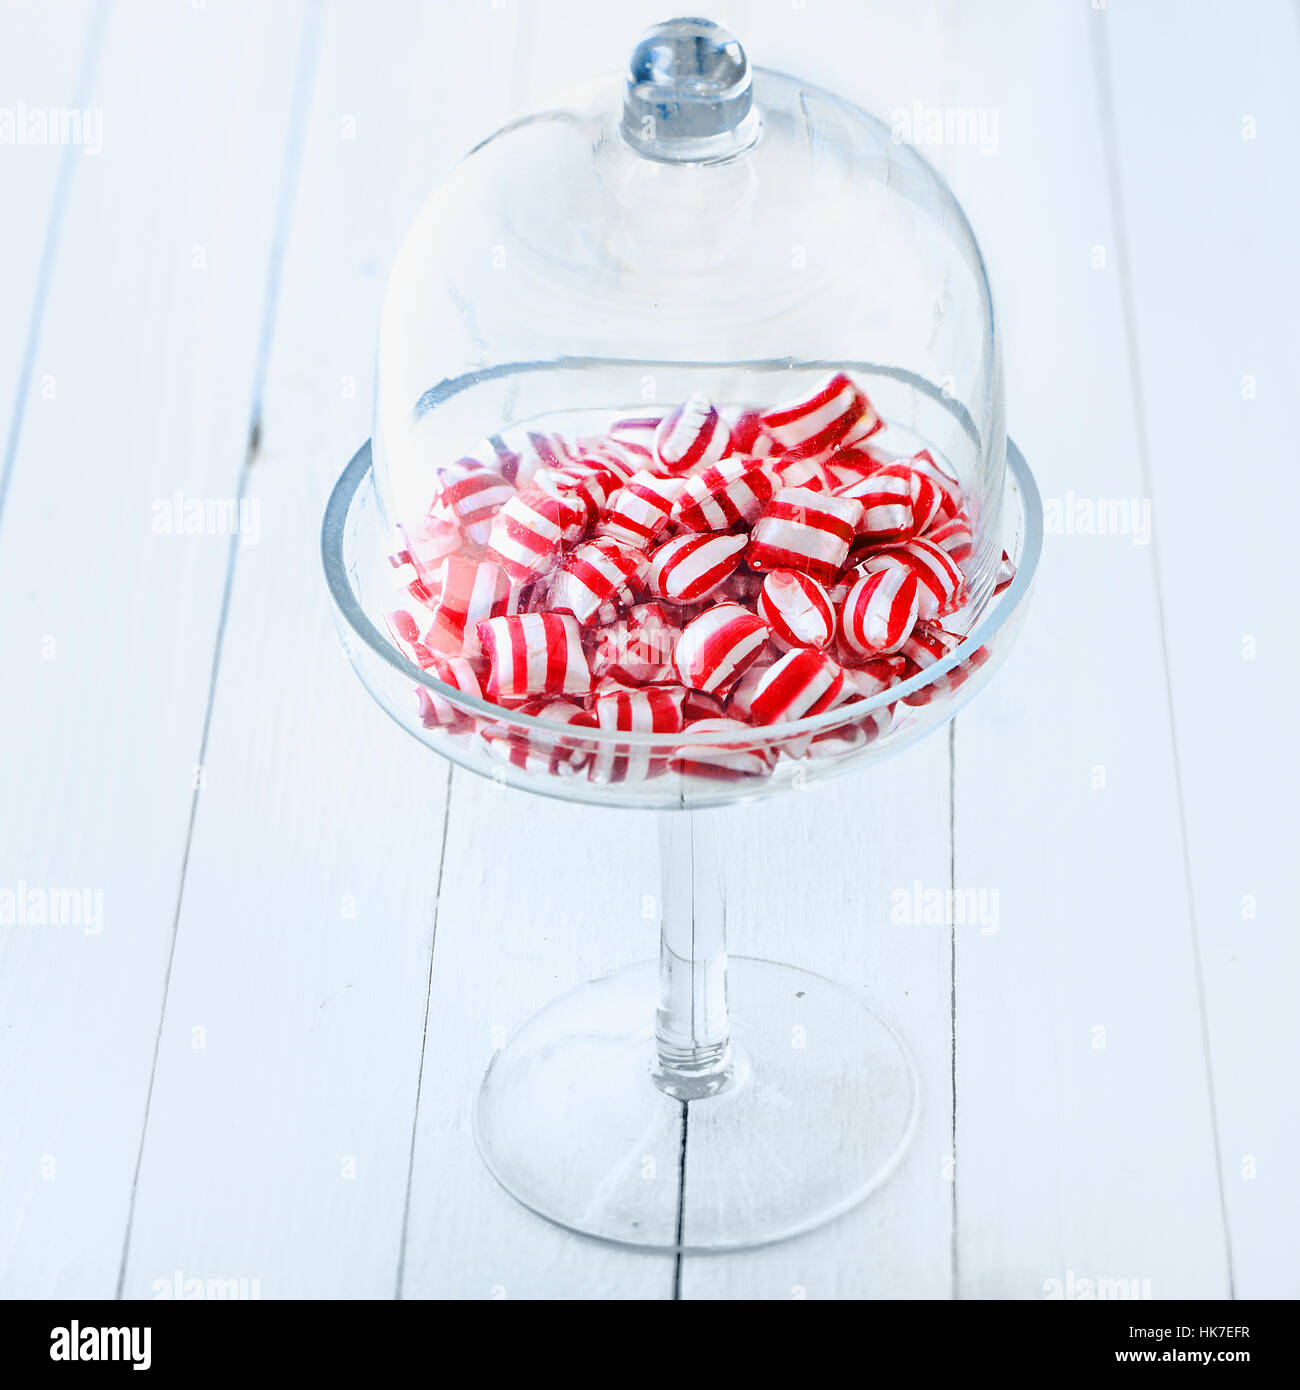 glass, chalice, tumbler, sweets, dome, sugar, party, celebration, gift, Stock Photo